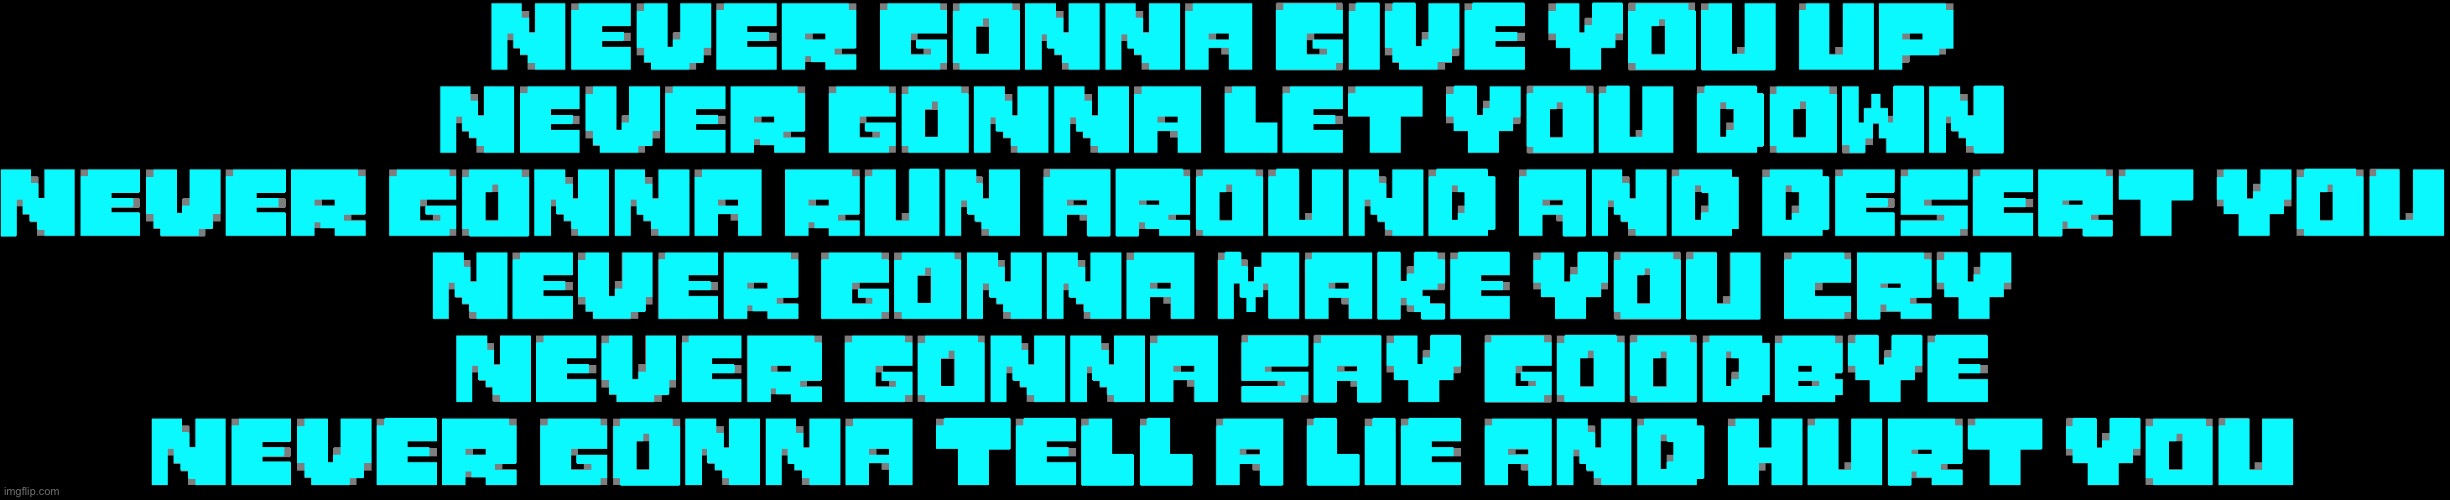 get underolled lol | image tagged in undertale rick roll,rick rolled,rick roll,undertale,never gonna give you up,never gonna let you down | made w/ Imgflip meme maker